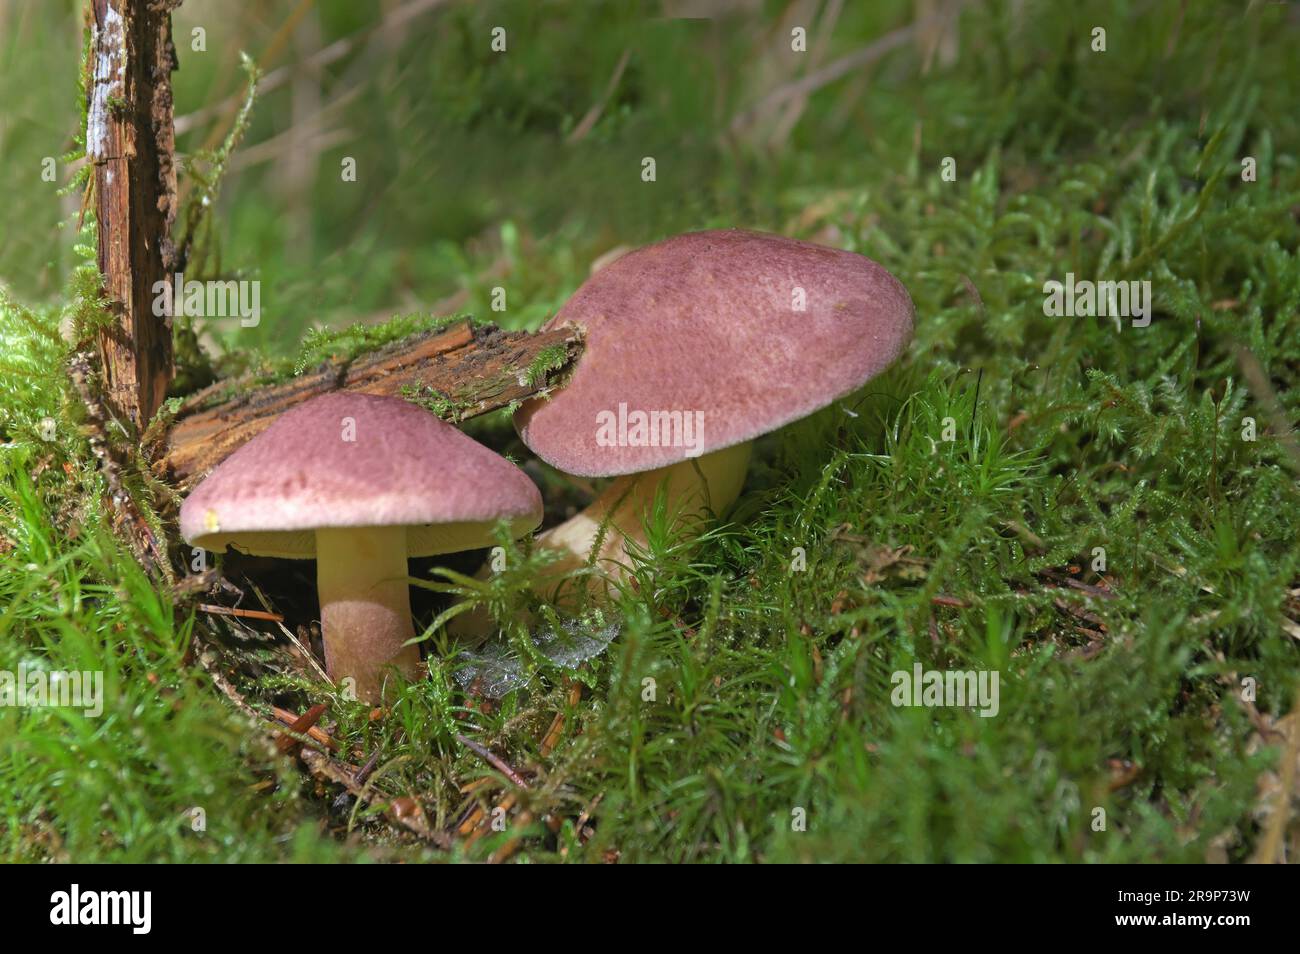 Russula torulosa. Fruit bodies in moss cushion on forest floor. Inedible, Bavaria, Germany Stock Photo